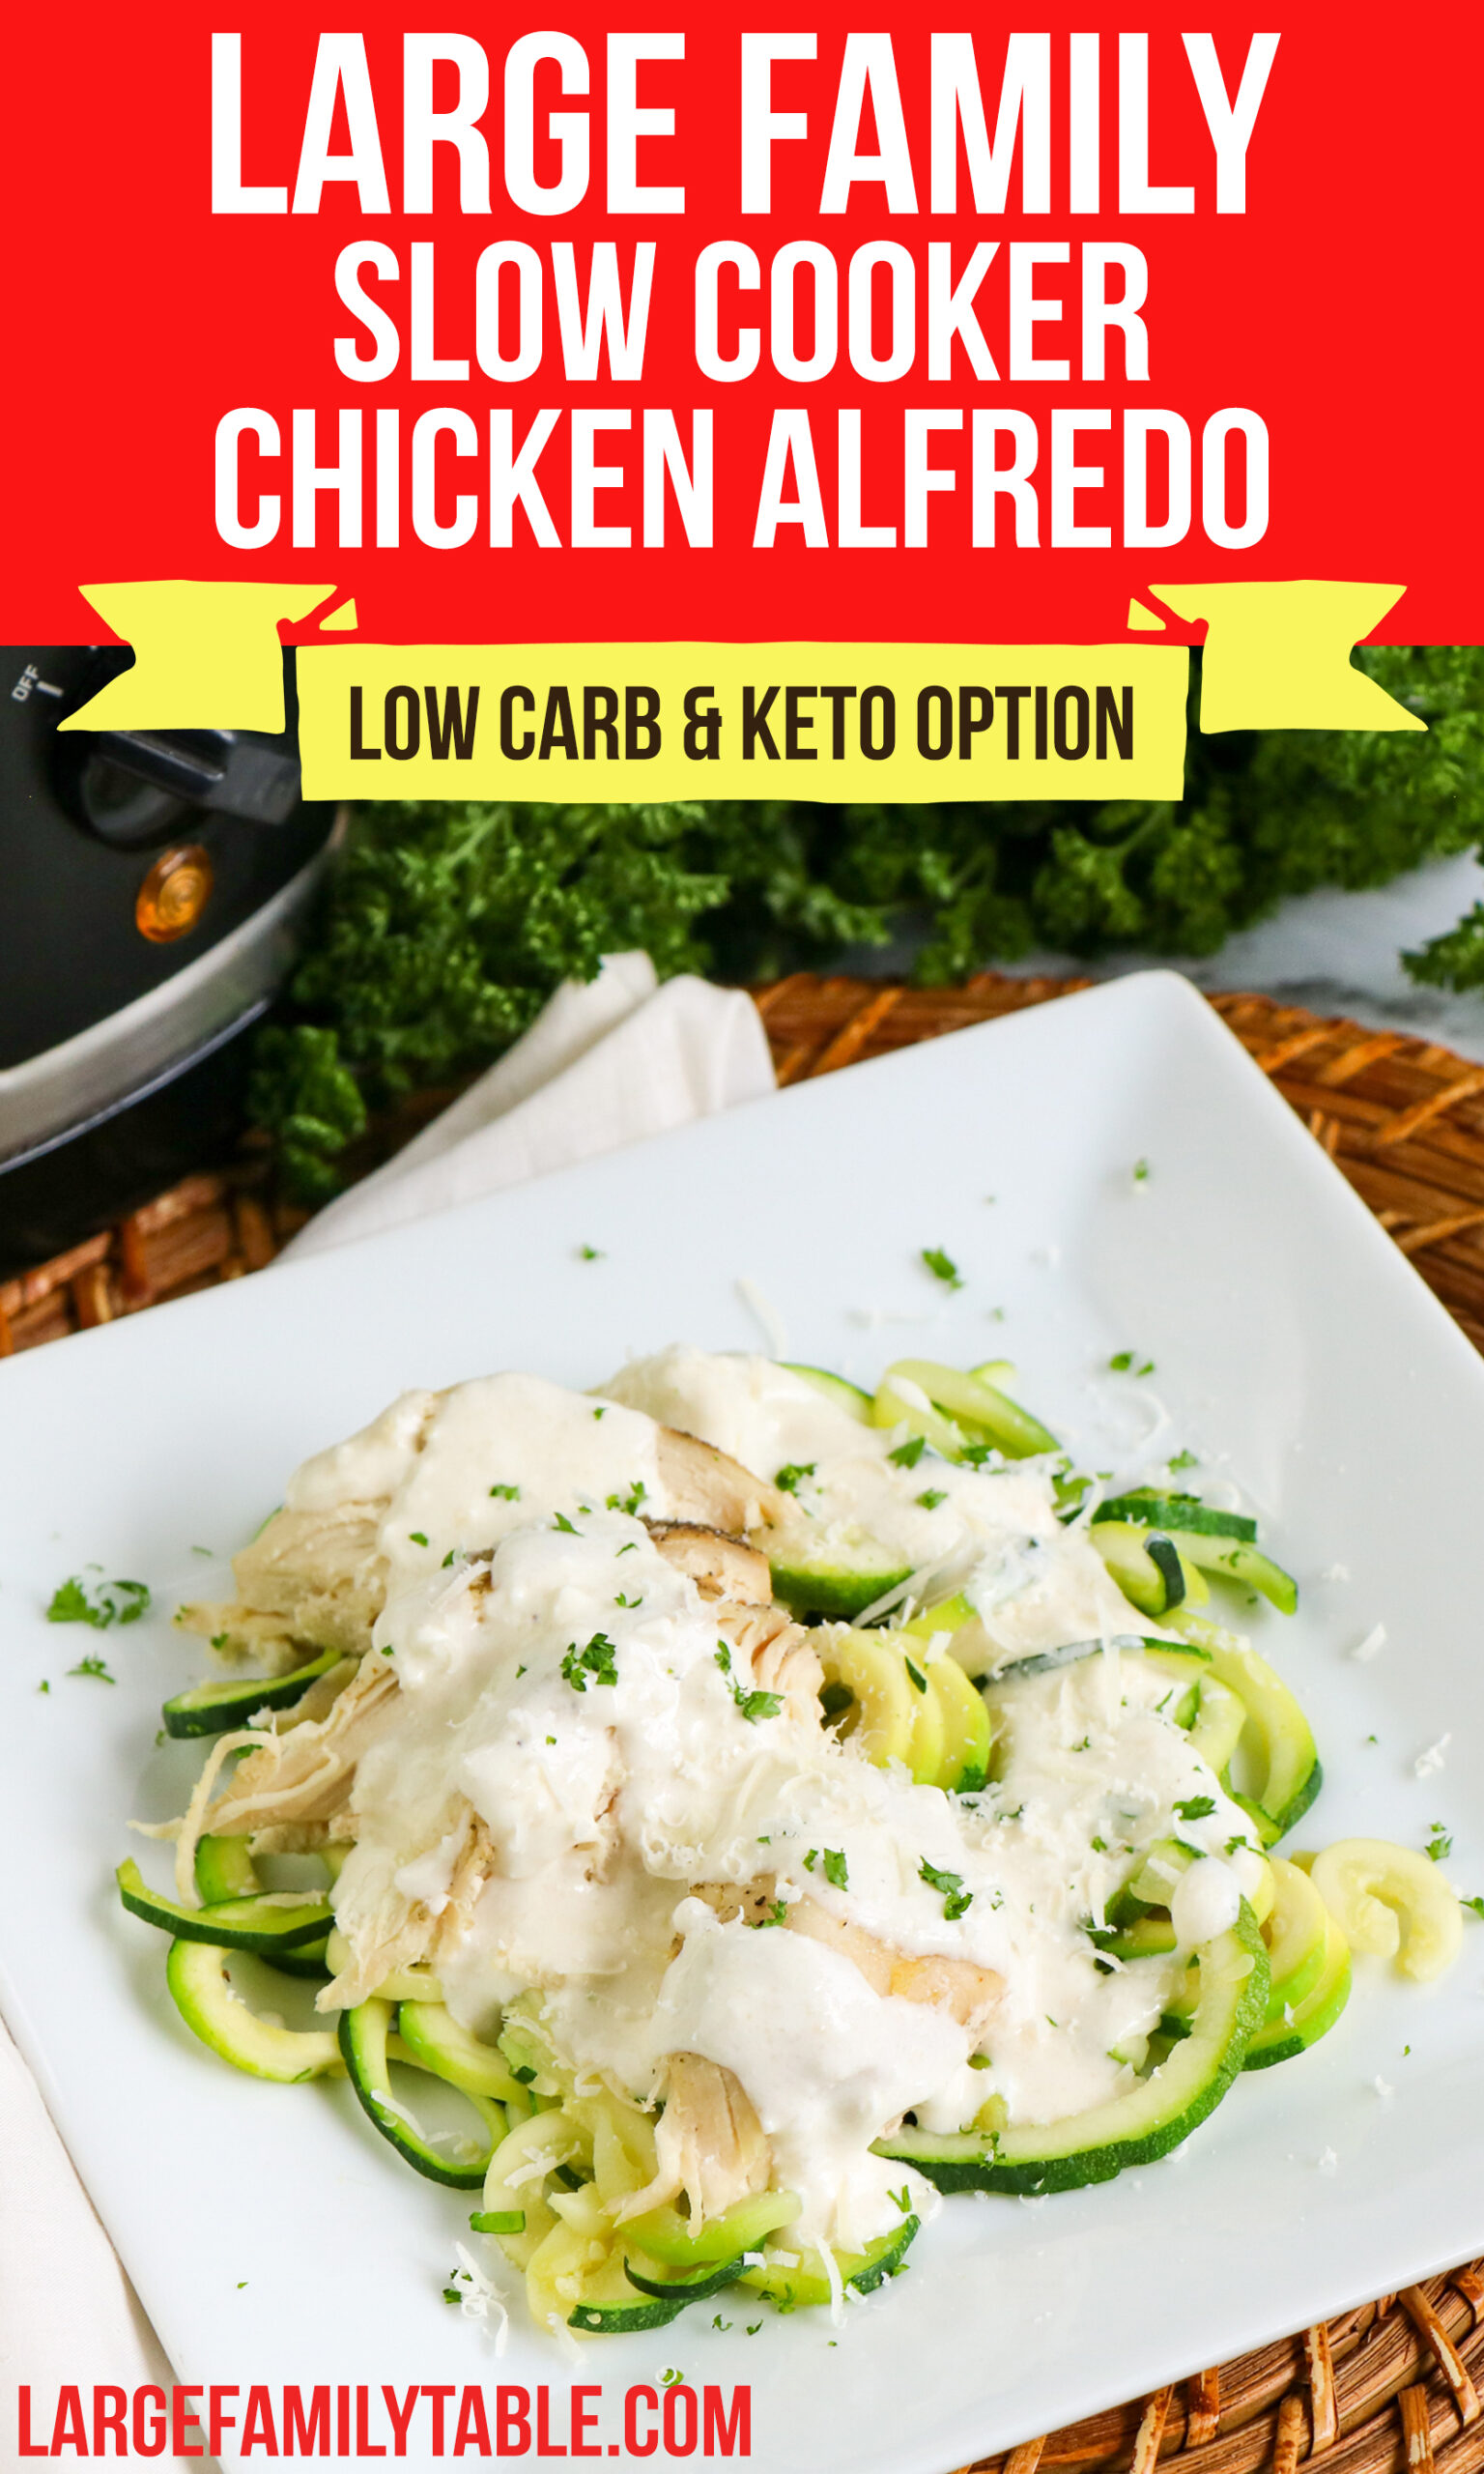 Large Family Slow Cooker Chicken Alfredo